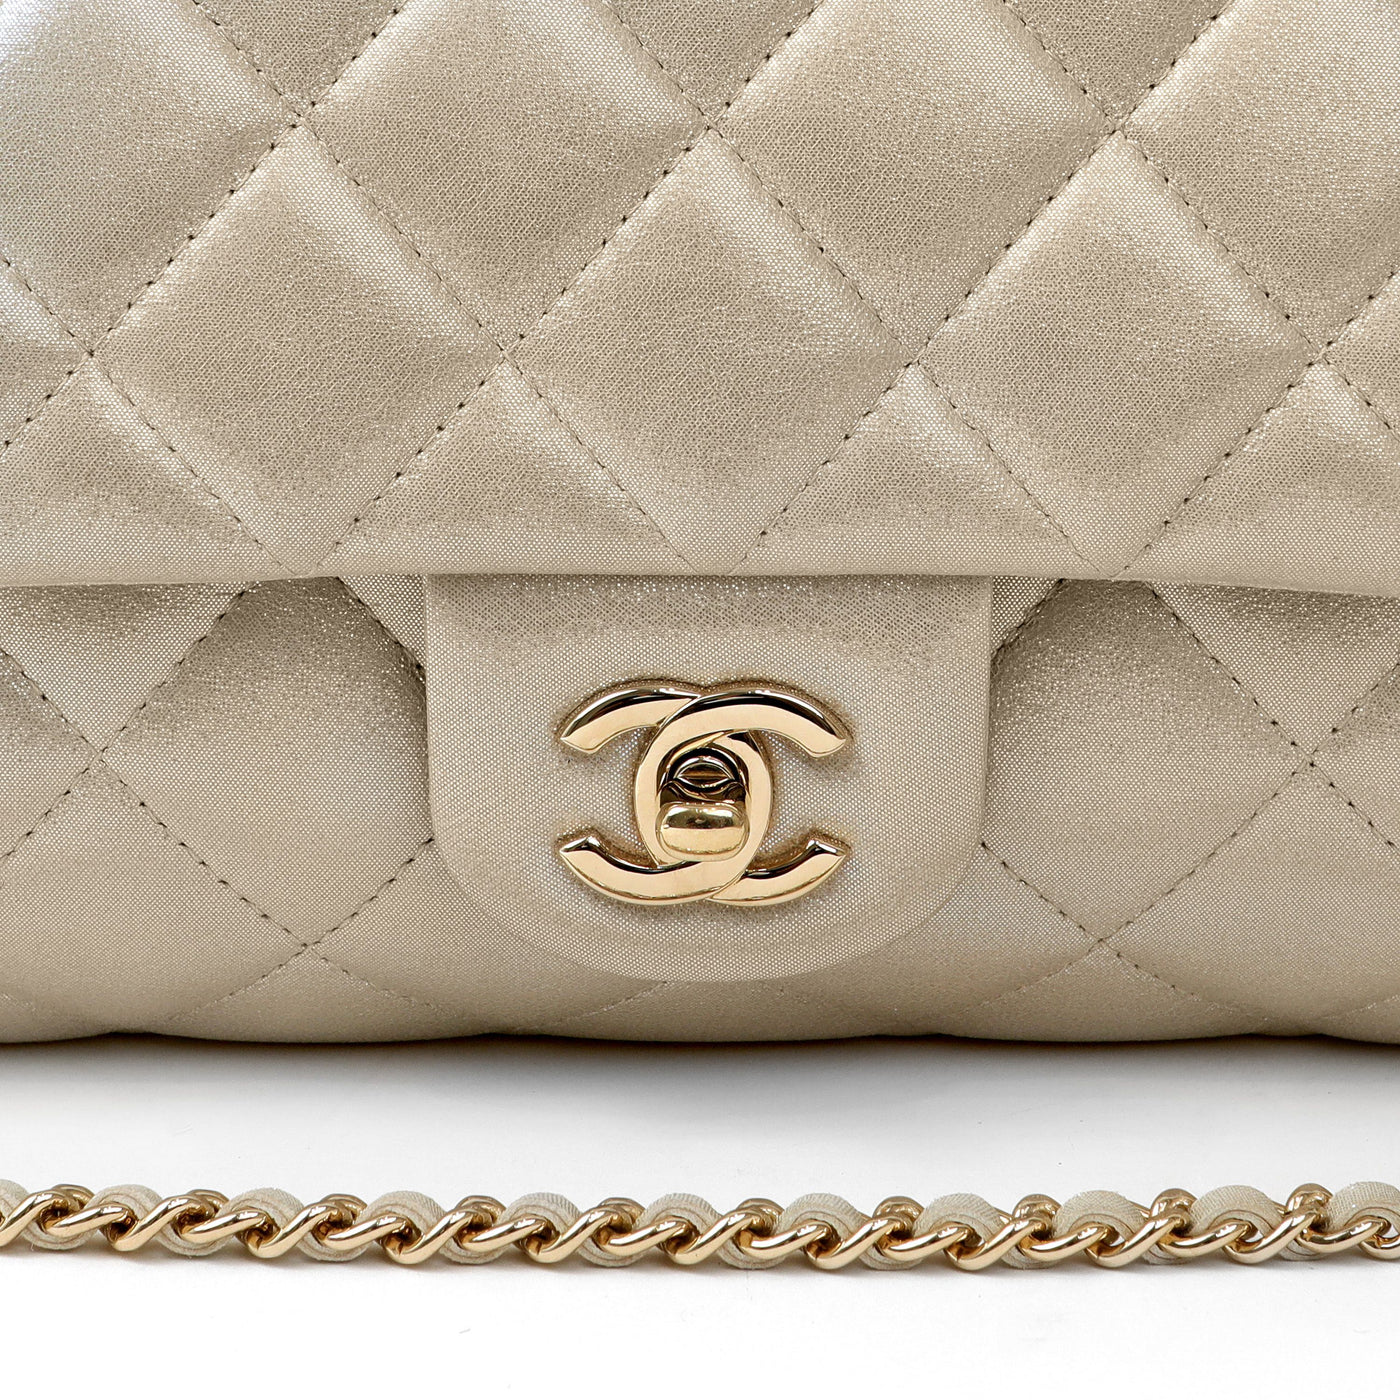 Chanel Metallic Gold Quilted Cloth Flap Bag w/ Gold Hardware